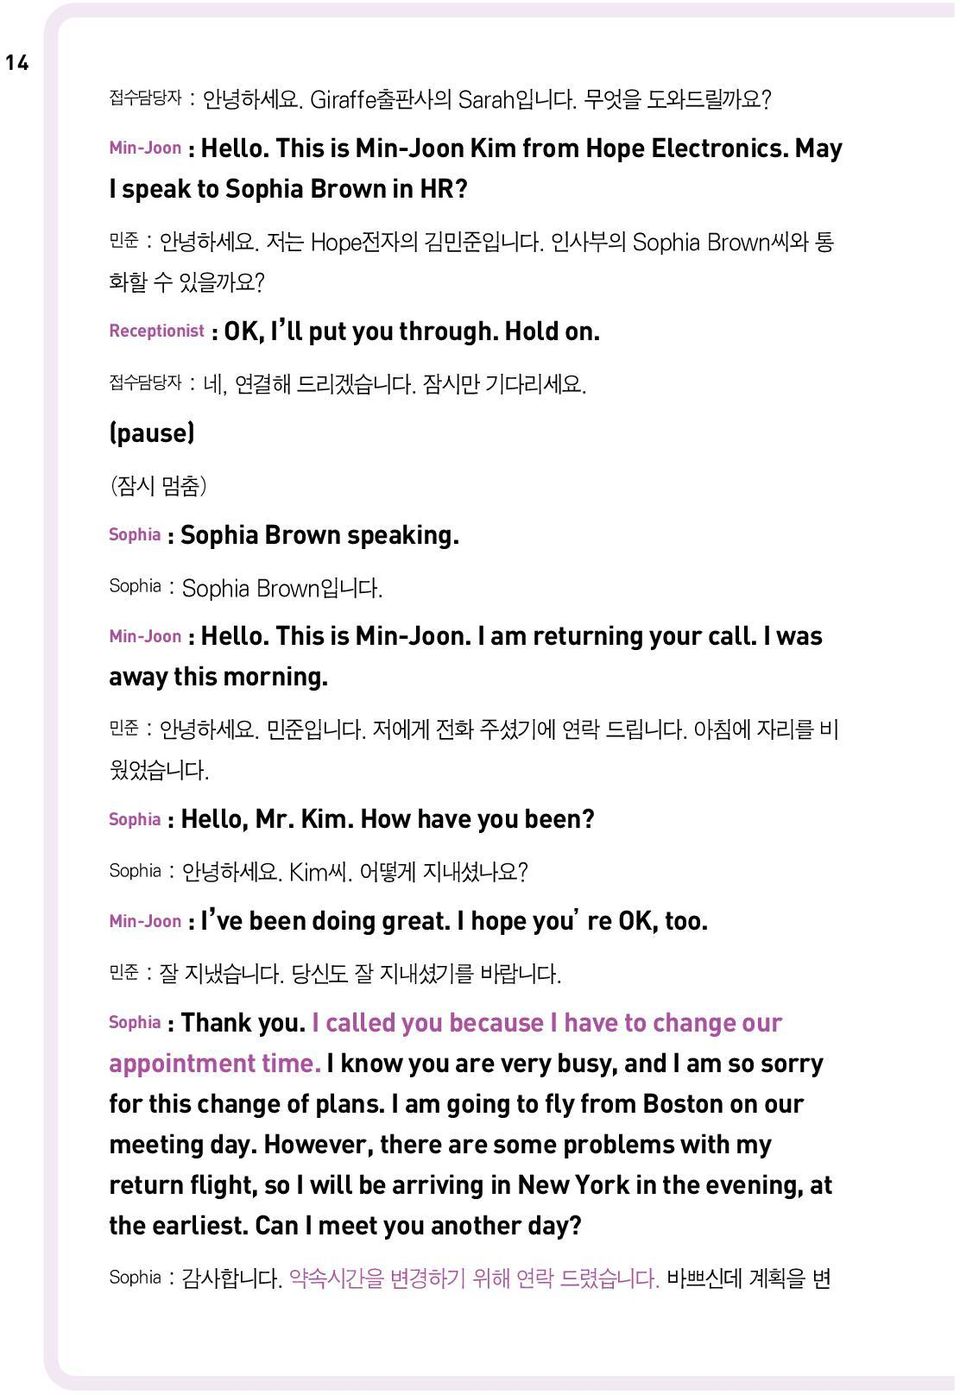 Min-Joon : I ve been doing great. I hope you re OK, too. Sophia : Thank you. I called you because I have to change our appointment time.